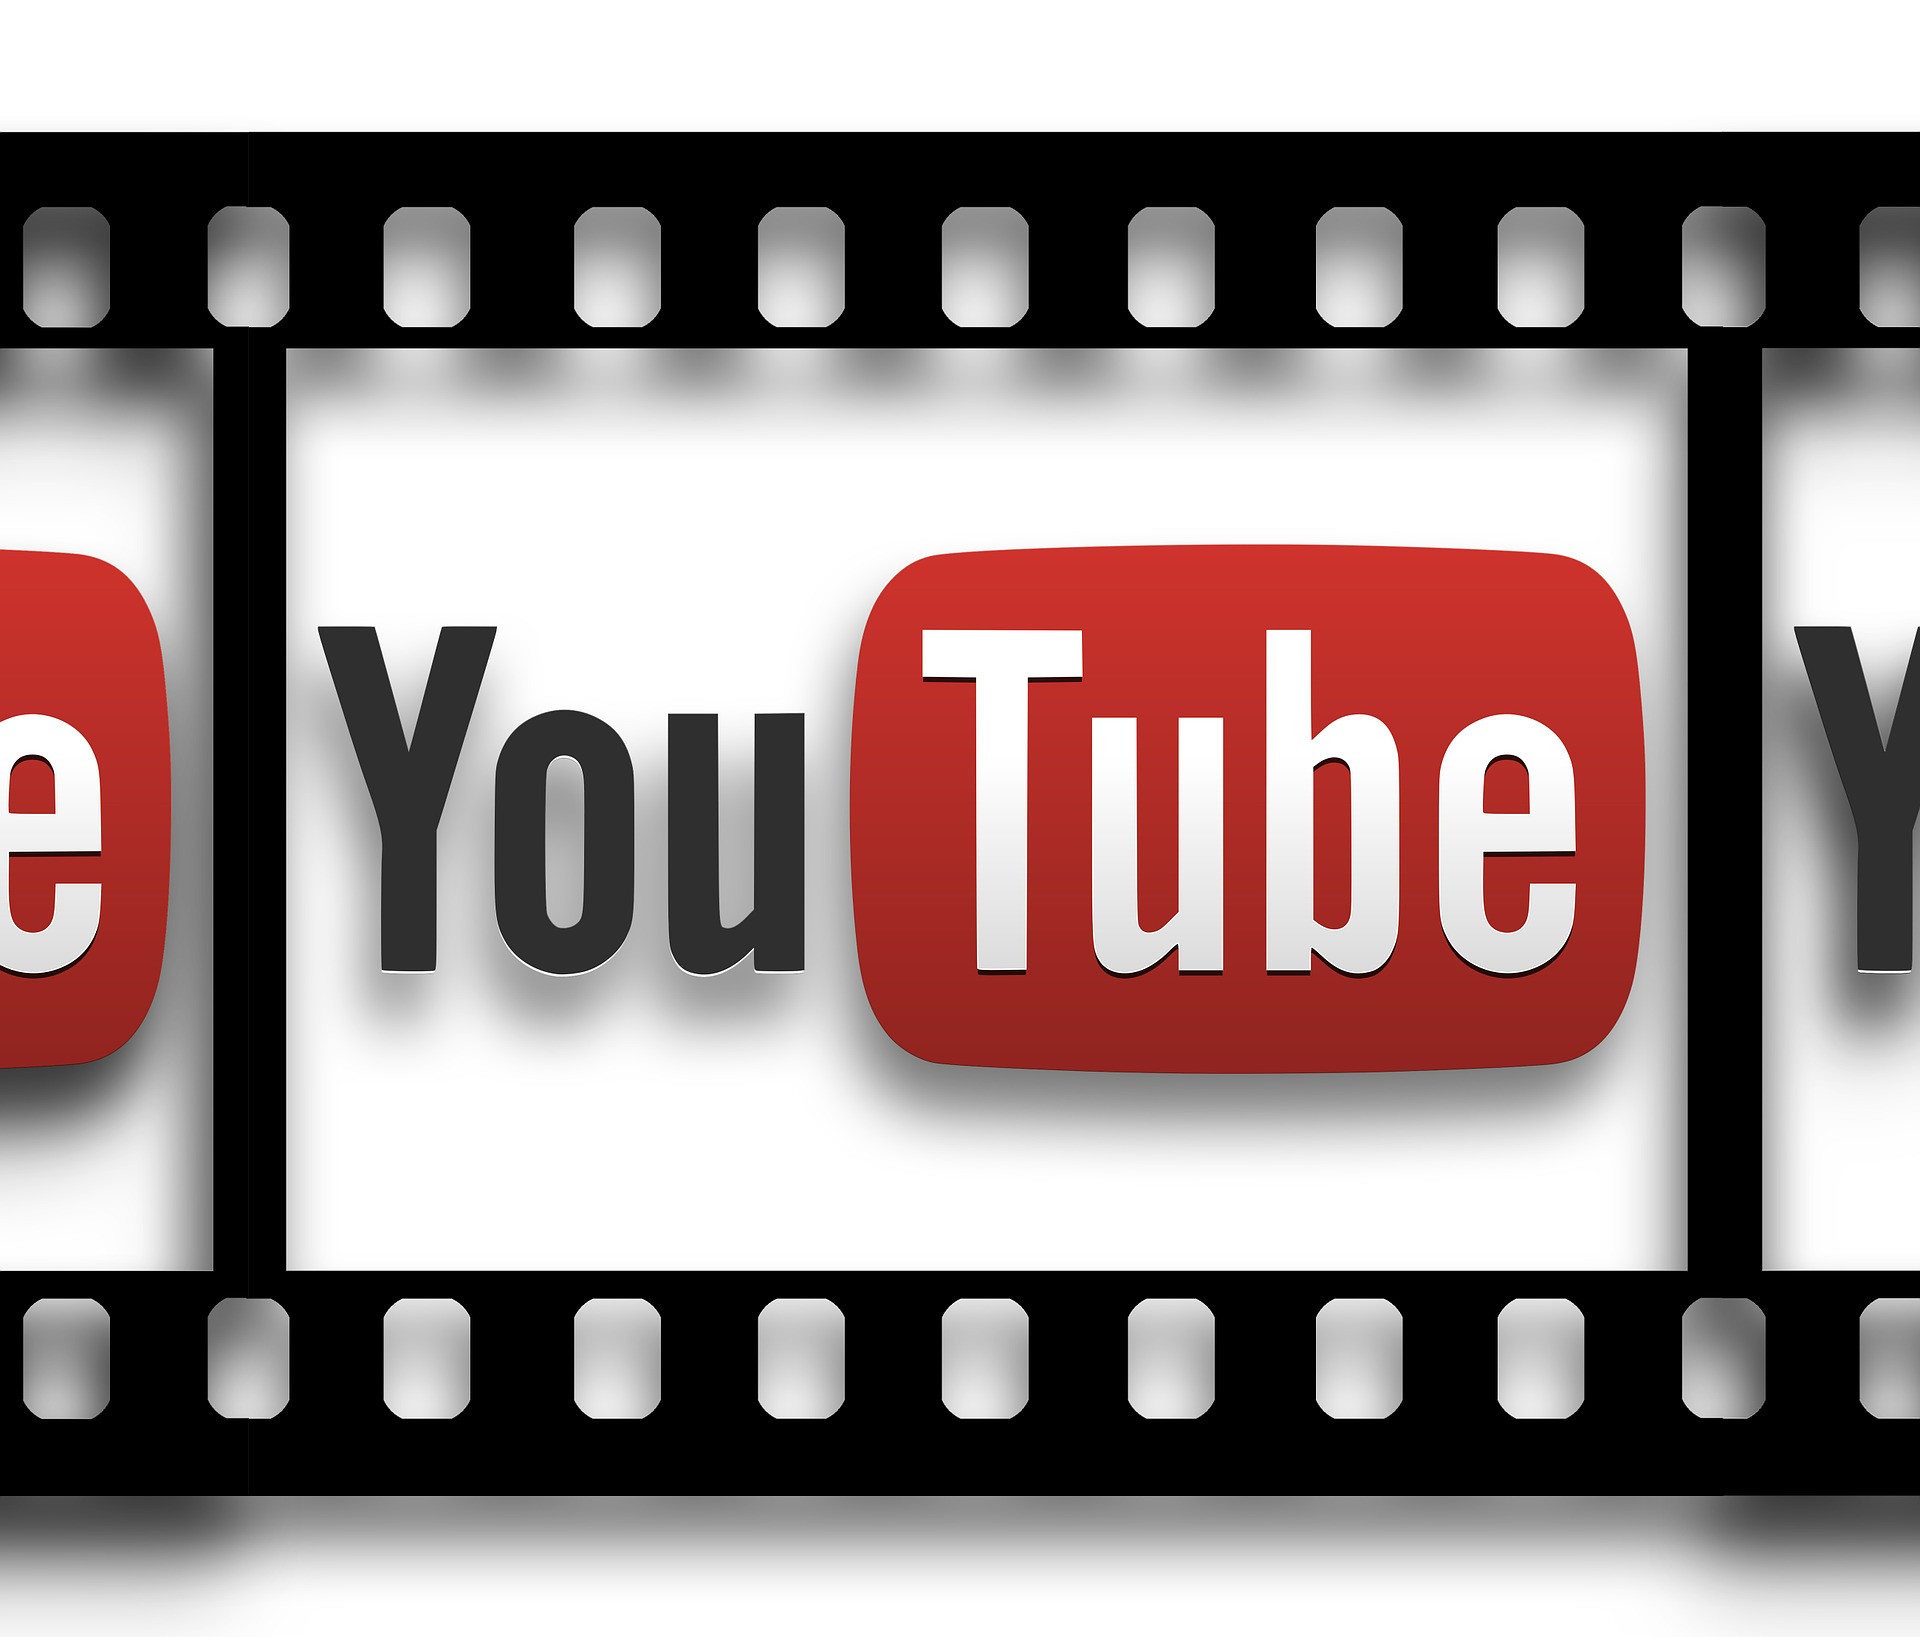 Top 5 tips for detecting and mitigating risks across YouTube videos